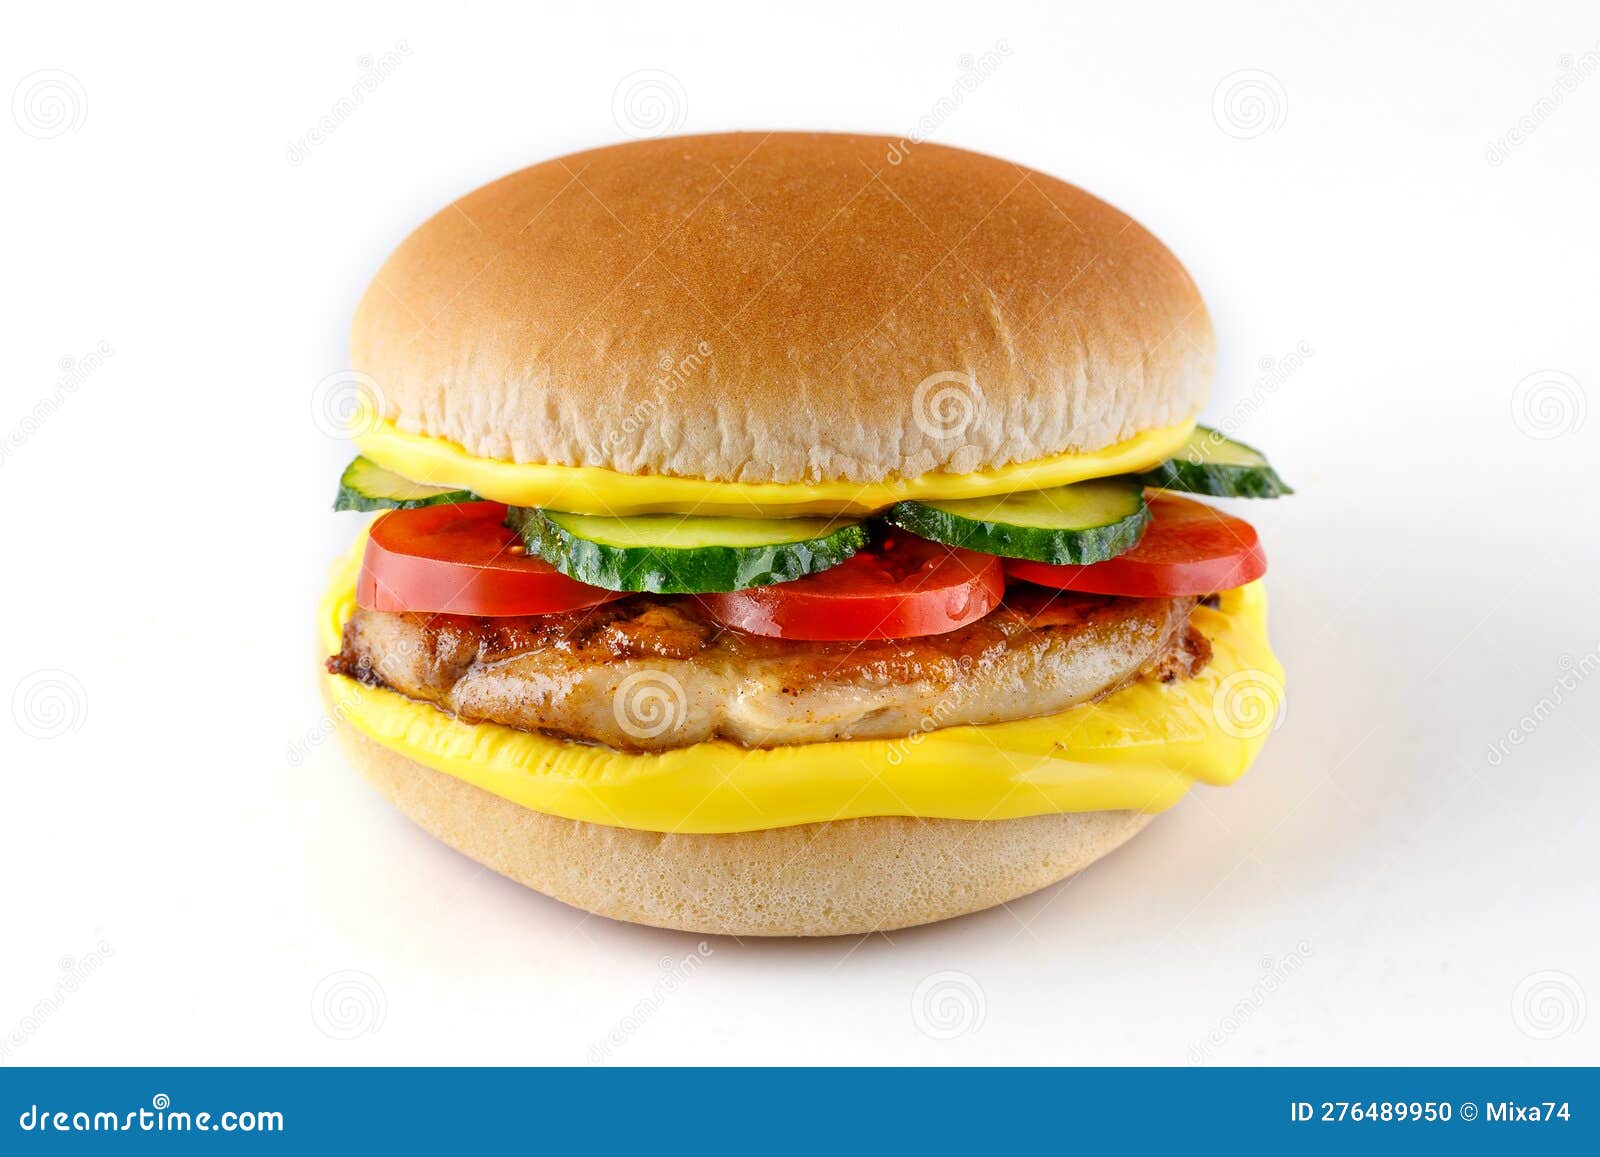 classic burger like in mcdonalds with chicken on white background for menu and website  of food delivery restaurant 1